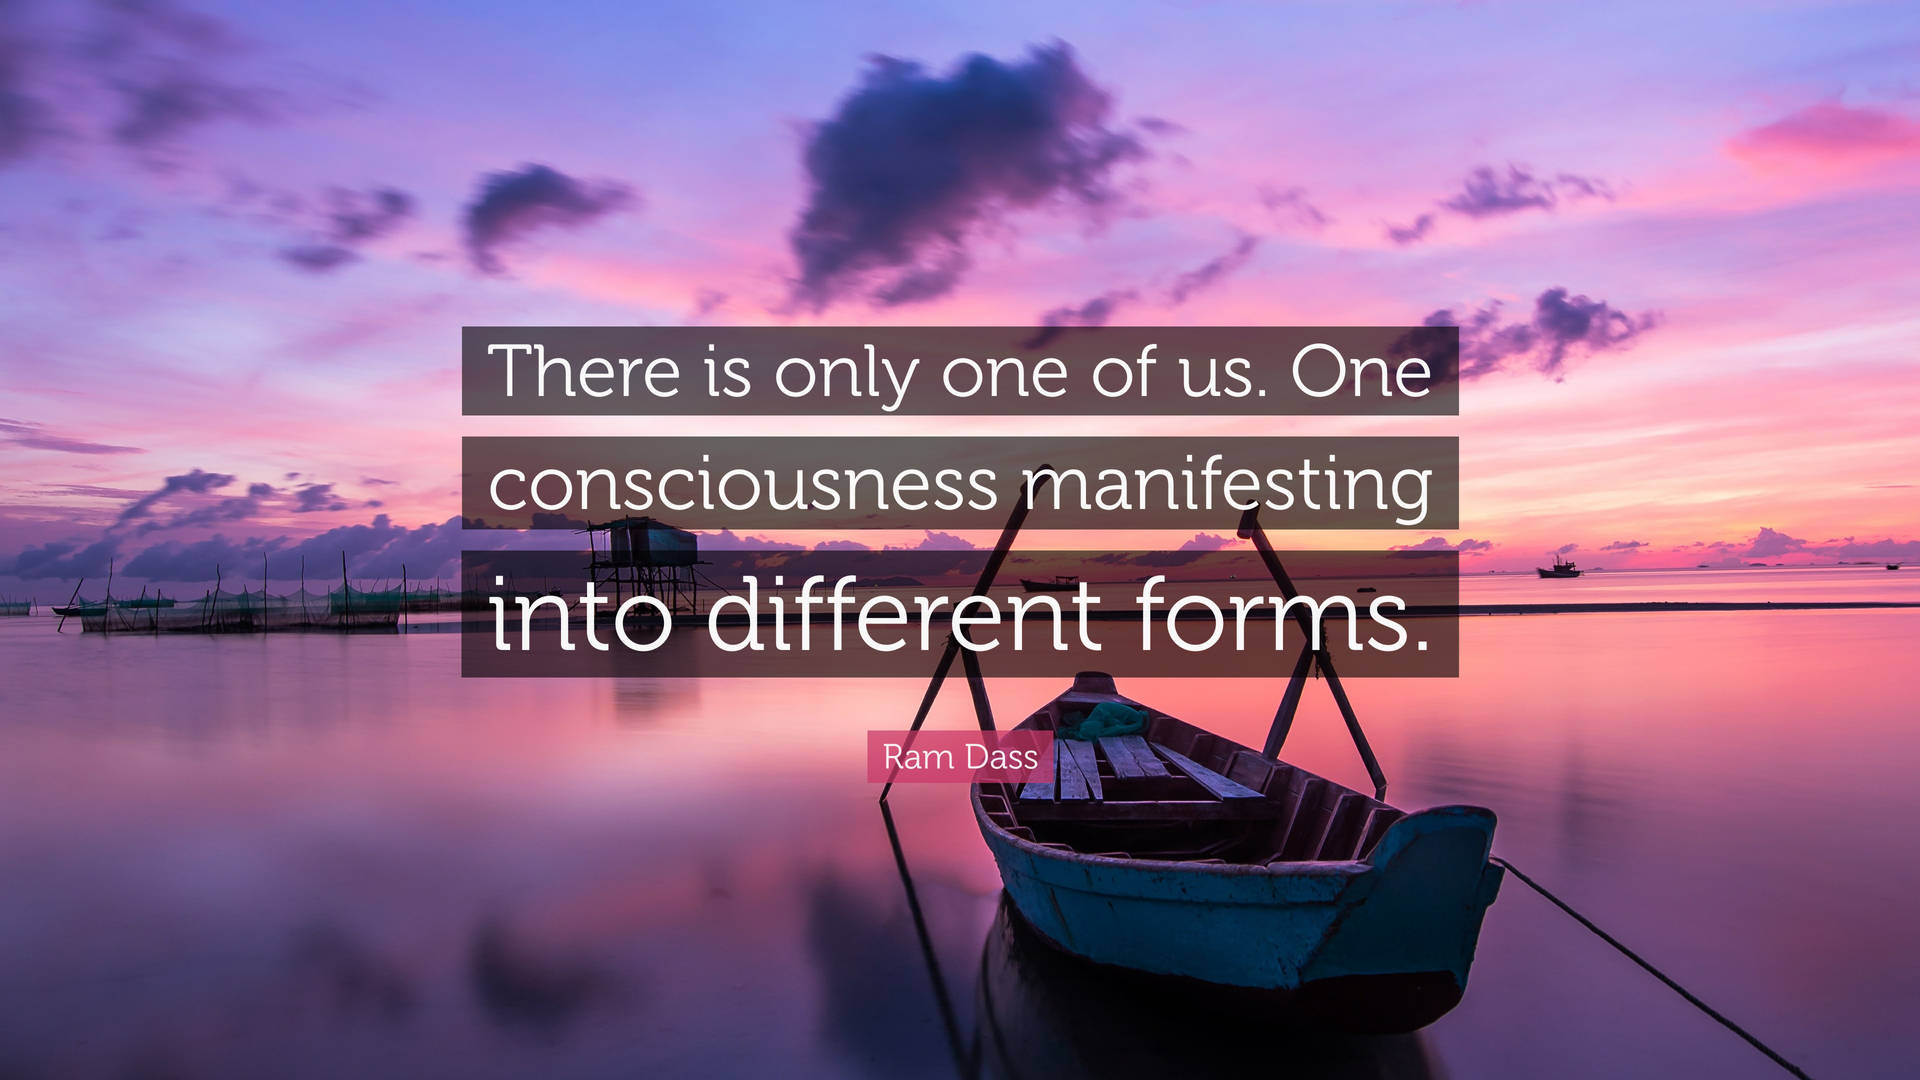 Manifest One Consciousness Wallpaper